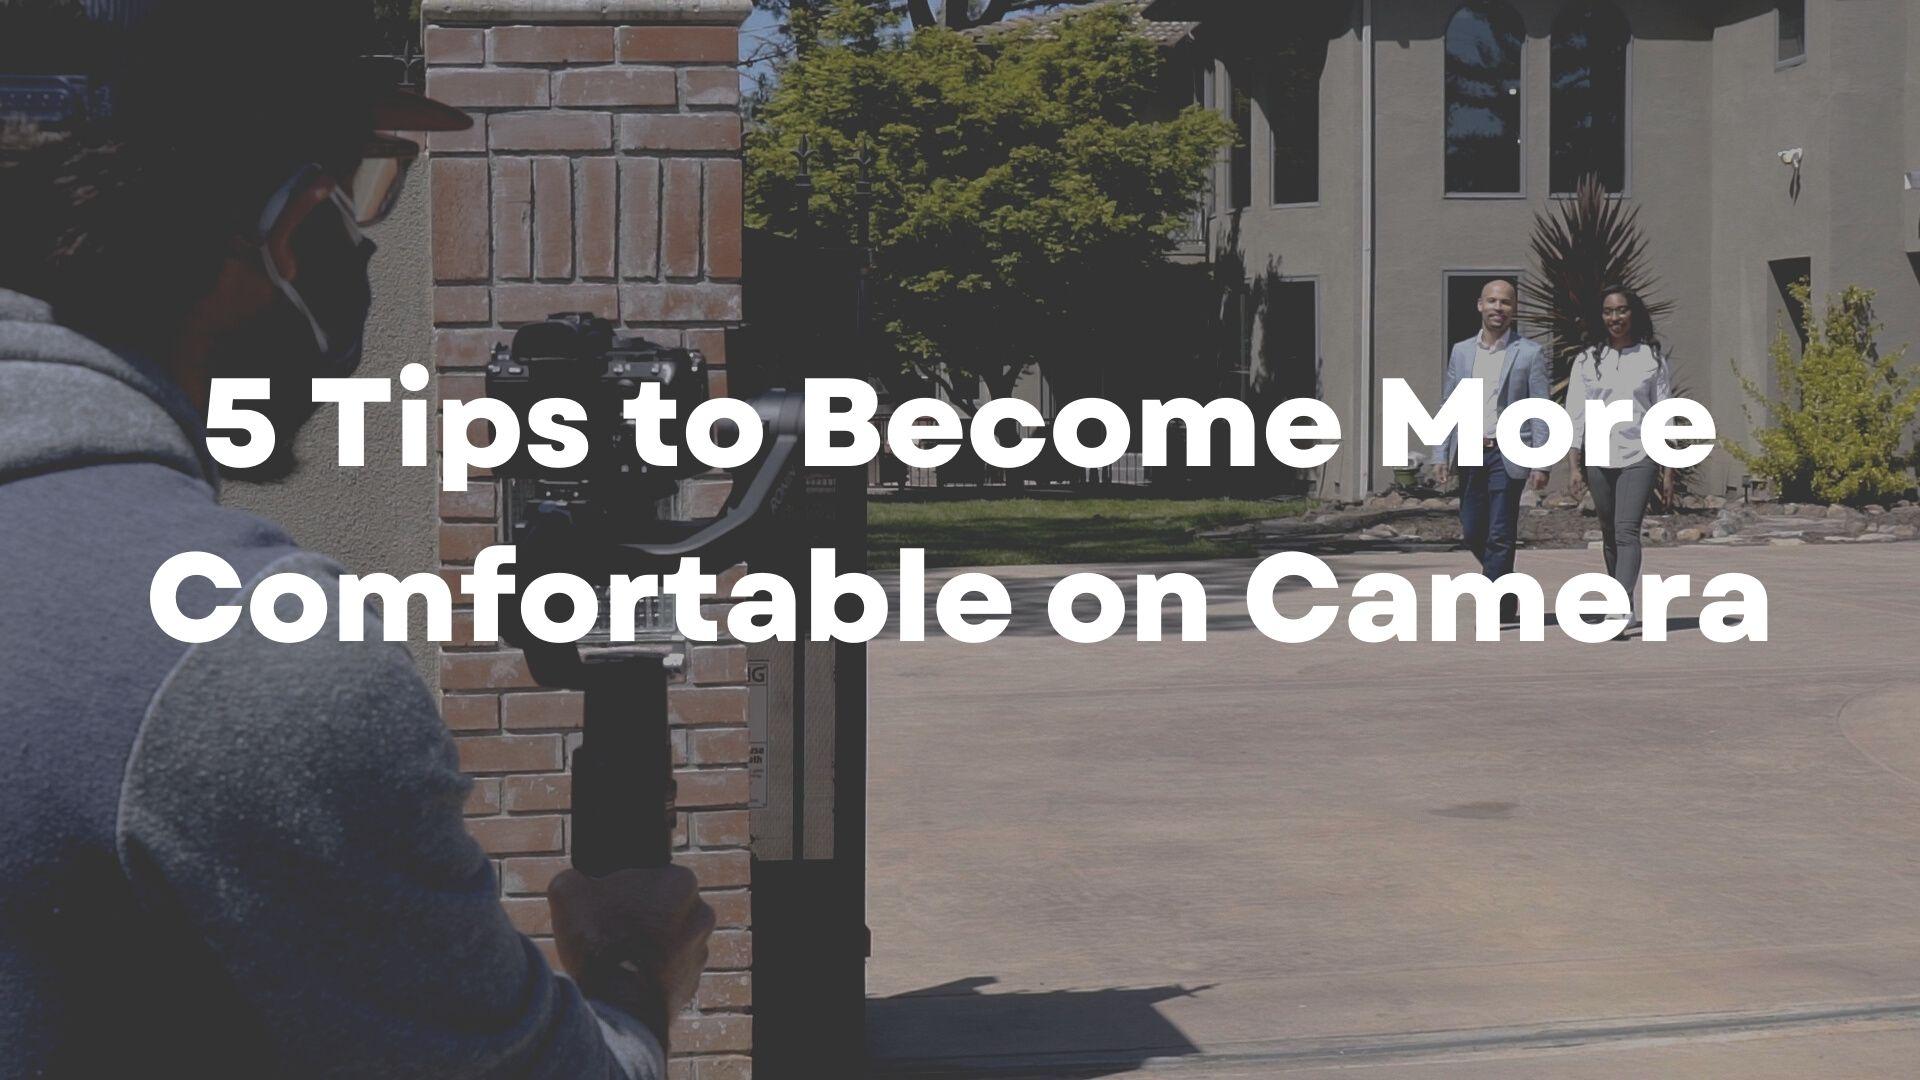 5 Tips to become more comfortable on camera